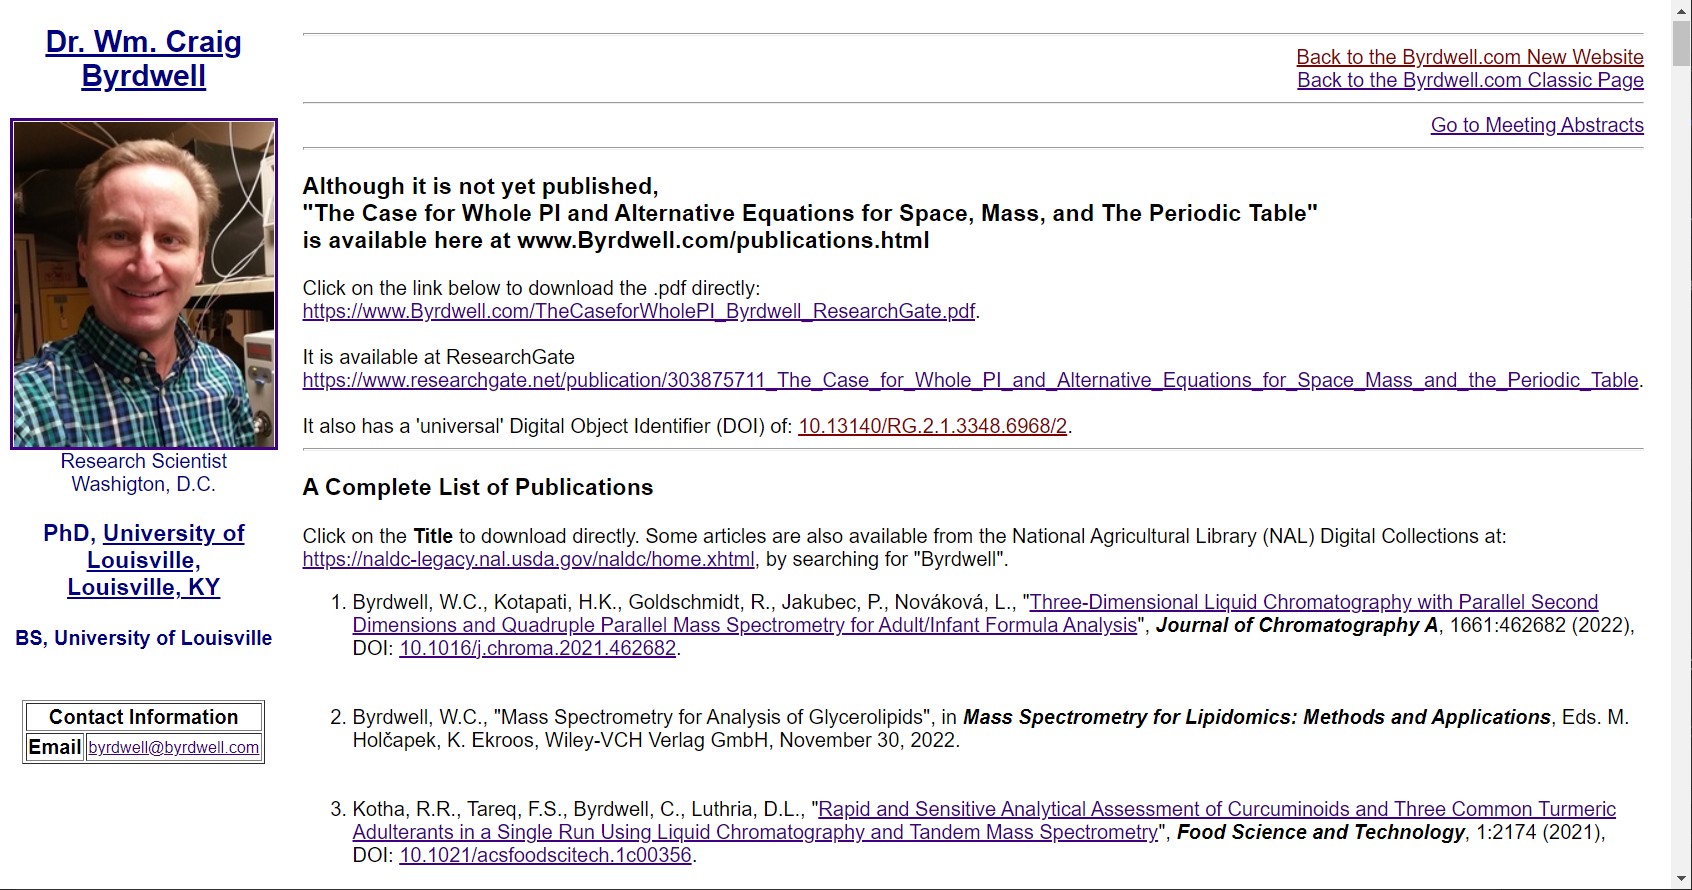 Dr. Byrdwell's Publications Page